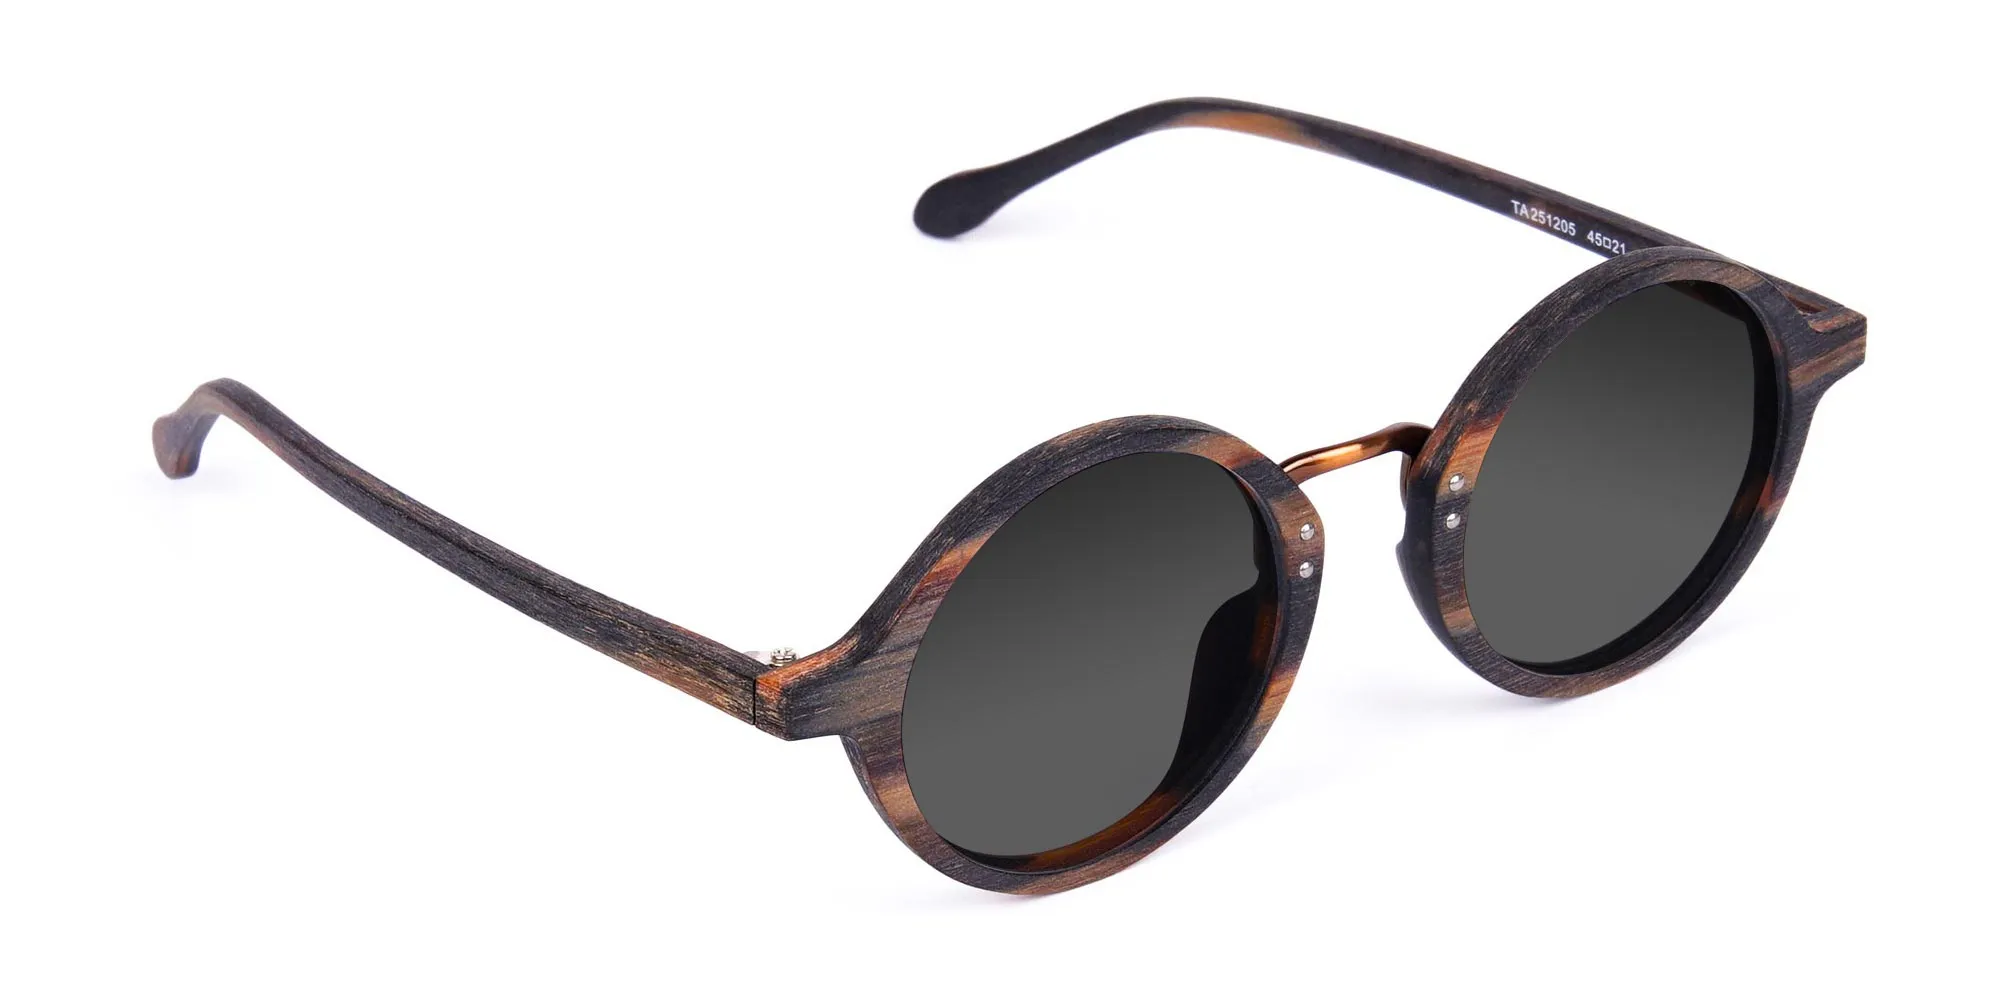 Wooden-Tortoise-Round-Sunglasses-with-Grey-Tint-2